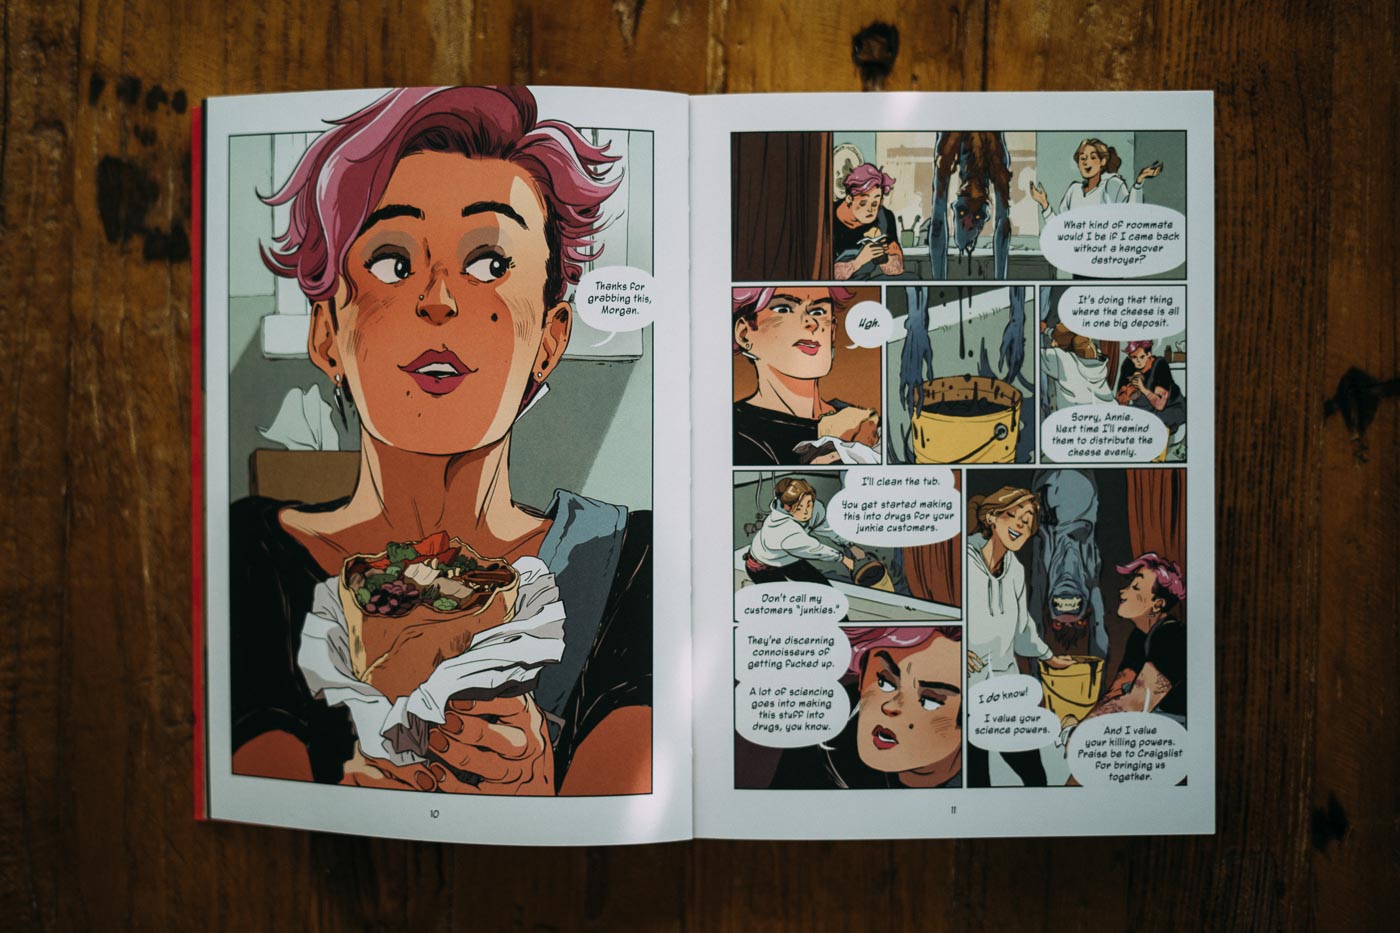 Photo of a spread from a graphic novel. One page is a close-up of a woman grabbing a bite from a wrapped sandwich. The other page depicts a casual conversation between two friends in a bathroom. Despite a dead alien hanging from the roof, they seem carefree.